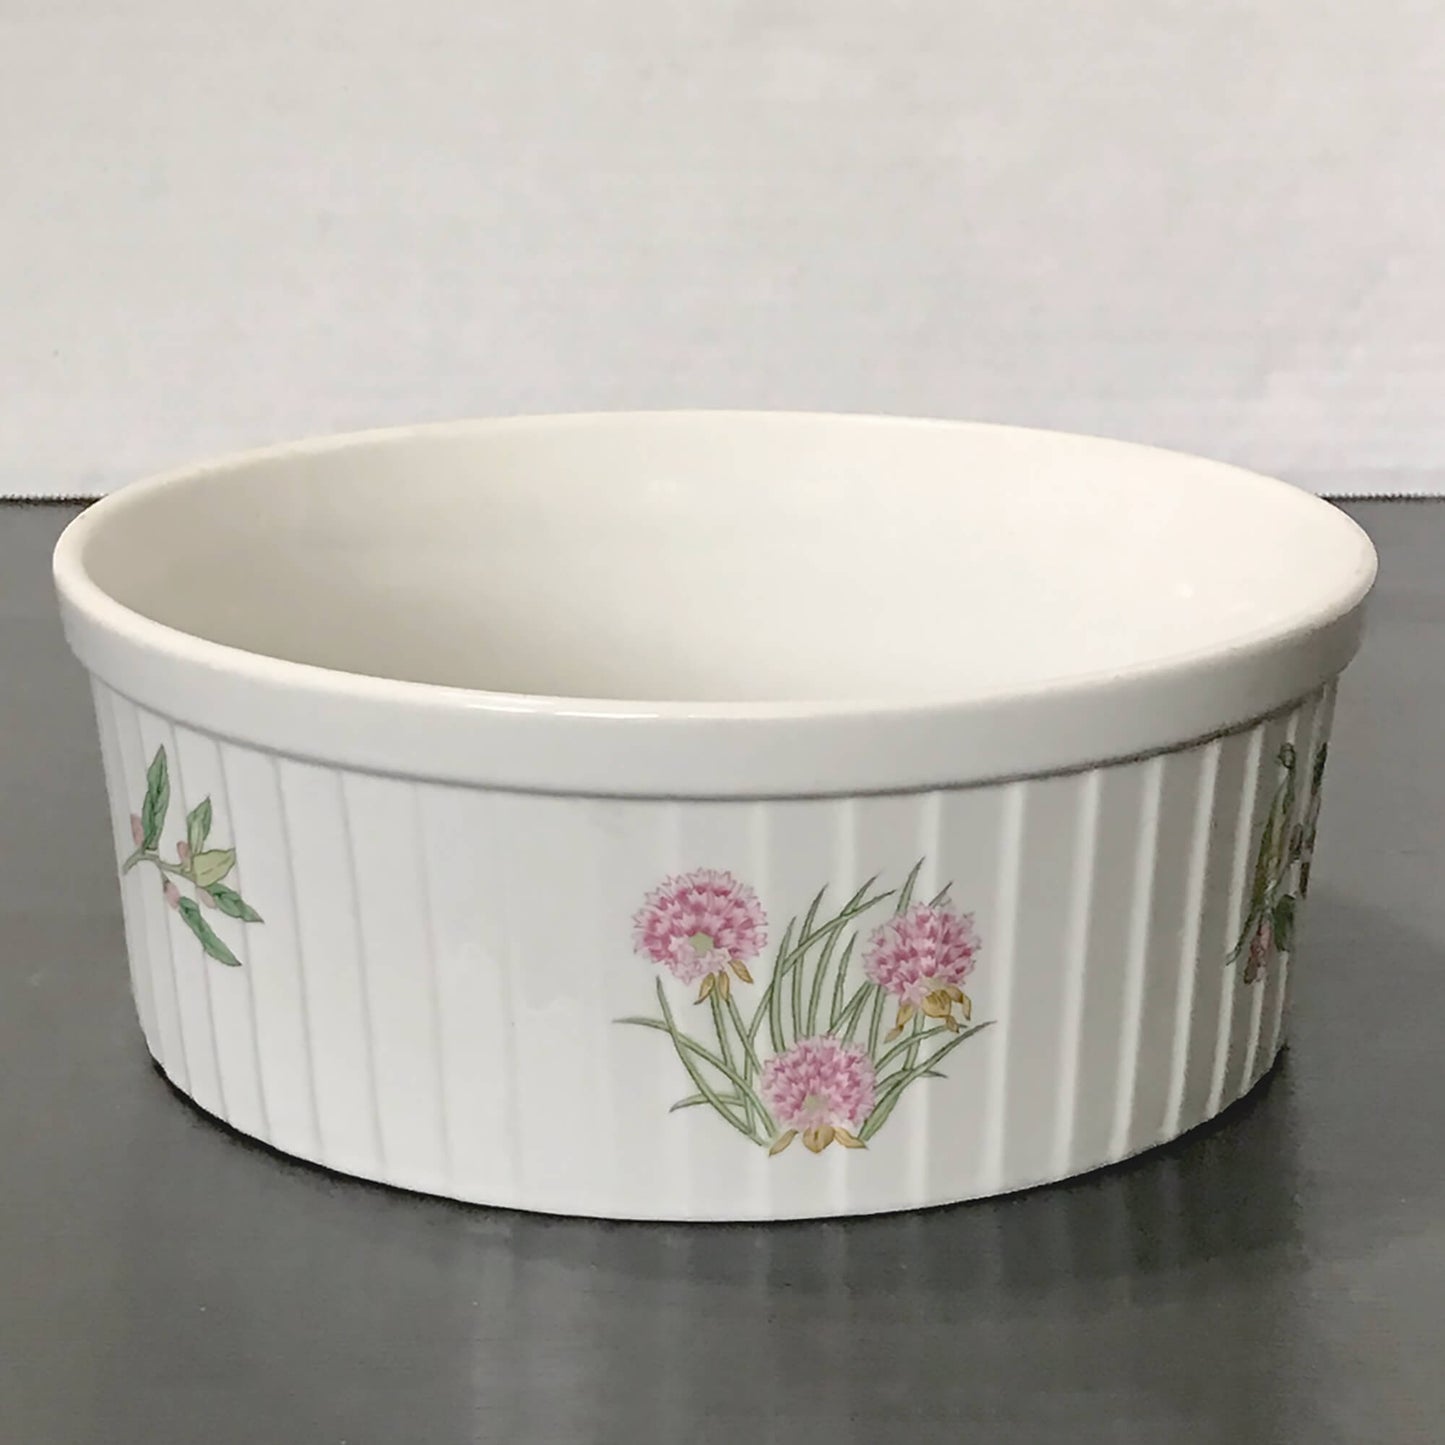 Herbs-and-Spices-9-in.-Round-Porcelain-Souffle/casserole-Dish.-Shop-eBargainsAndDeal.com.